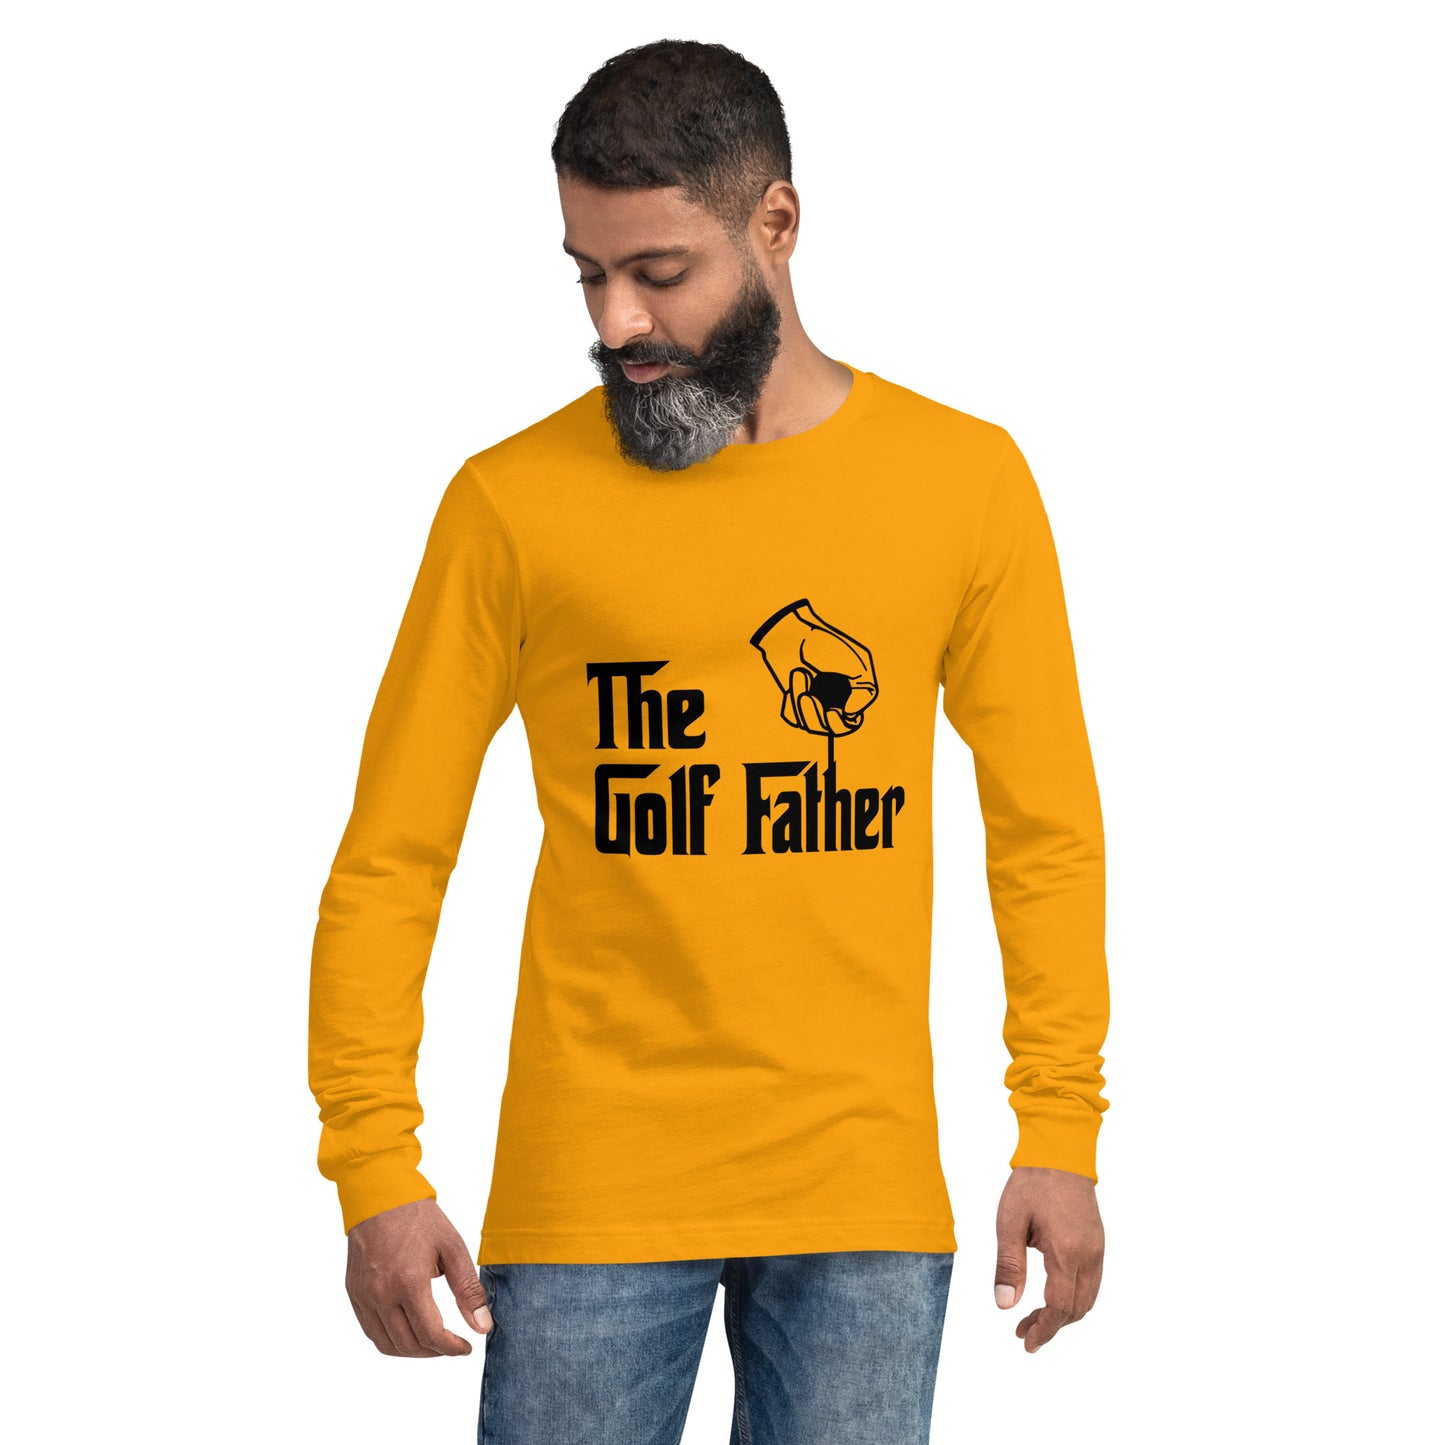 The Golf Father Long Sleeve Shirt